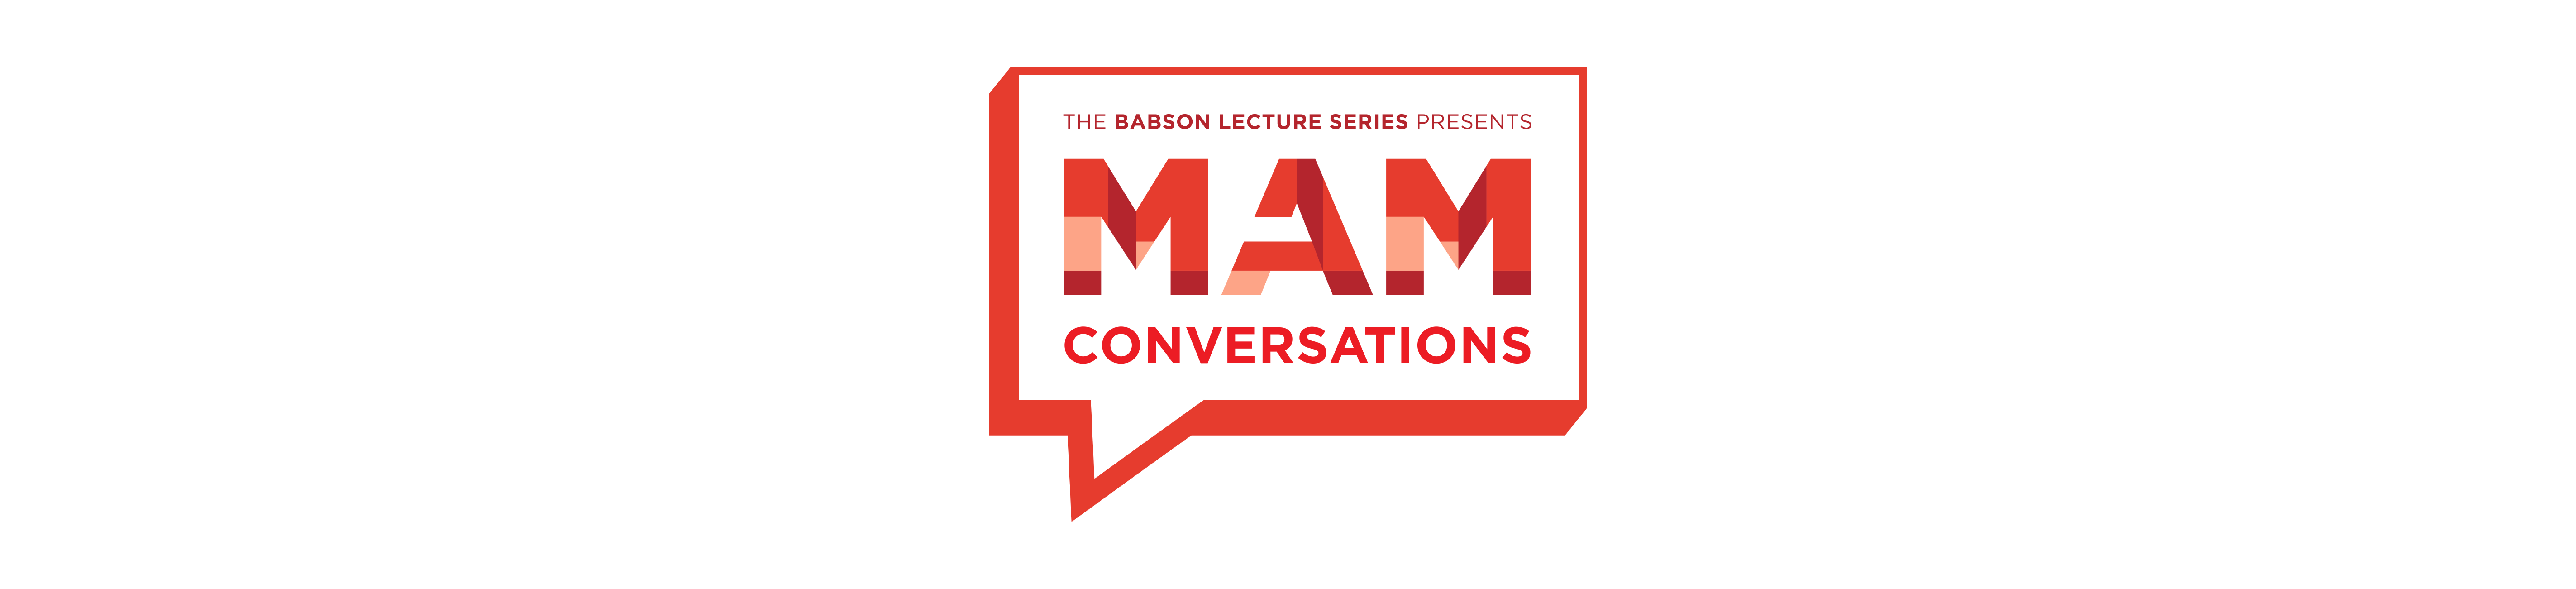 I'm an image! MAM conversations logo featuring a speech bubble on a white background